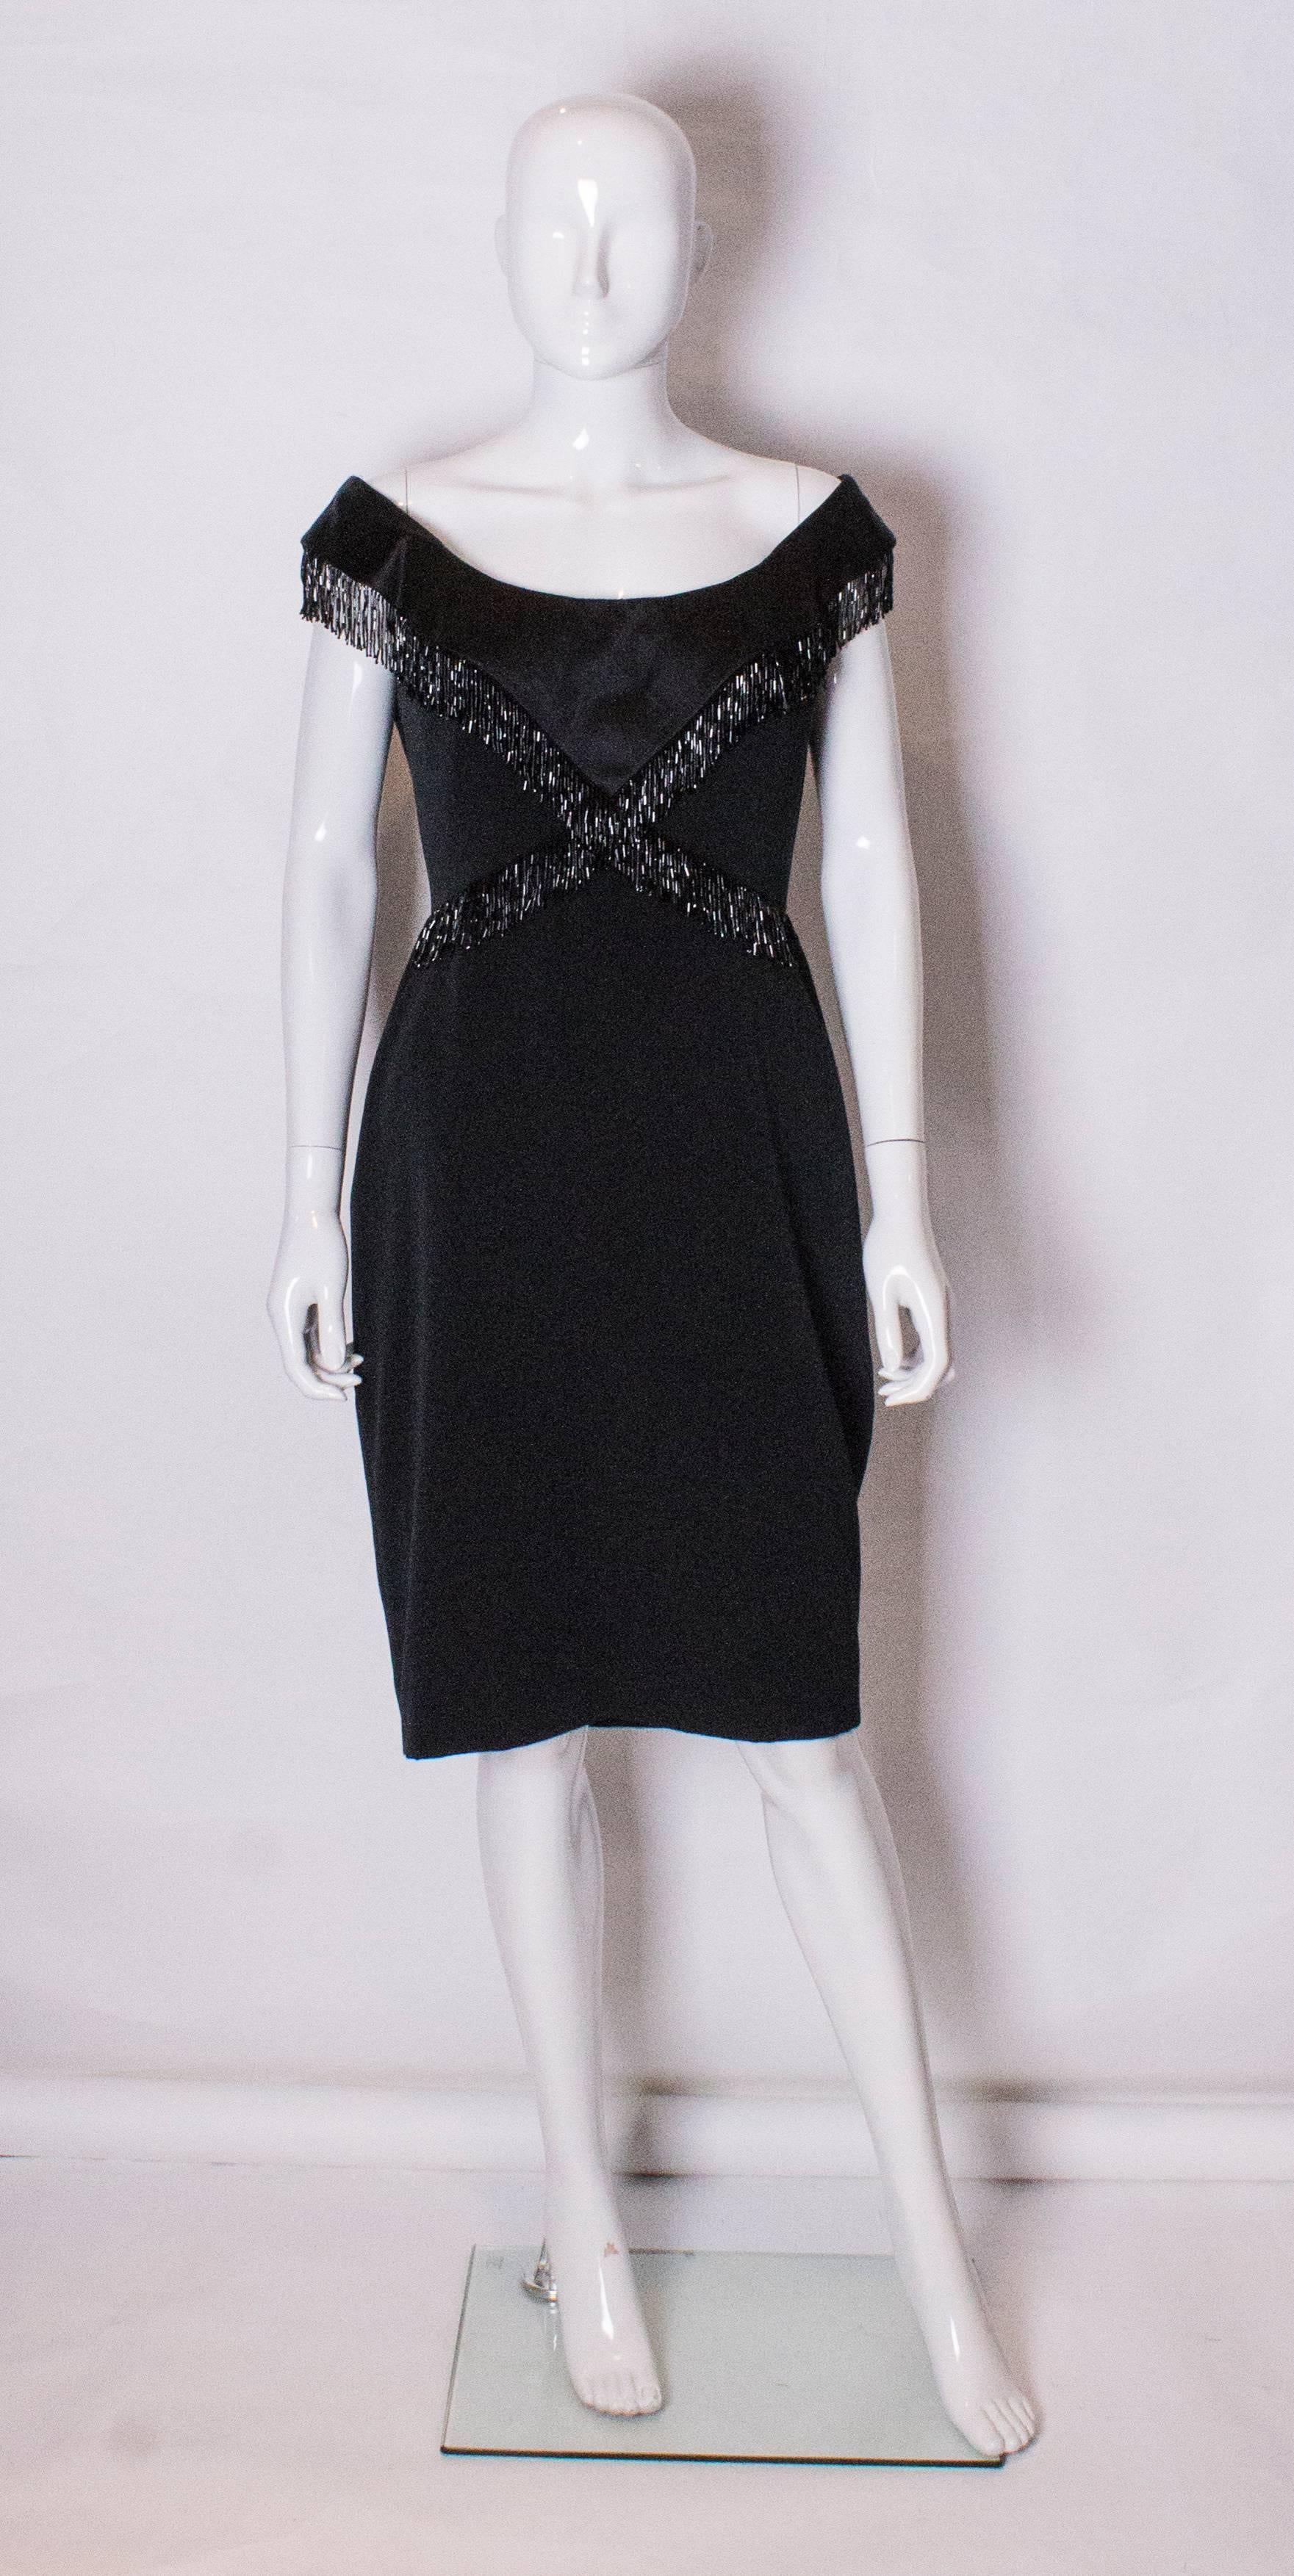 A chic cocktail dress by Bellvillse Sassoon.,The dress has a low boat neckline, and beading across the bust and waist. The dress is fully lined and has a central back zip.